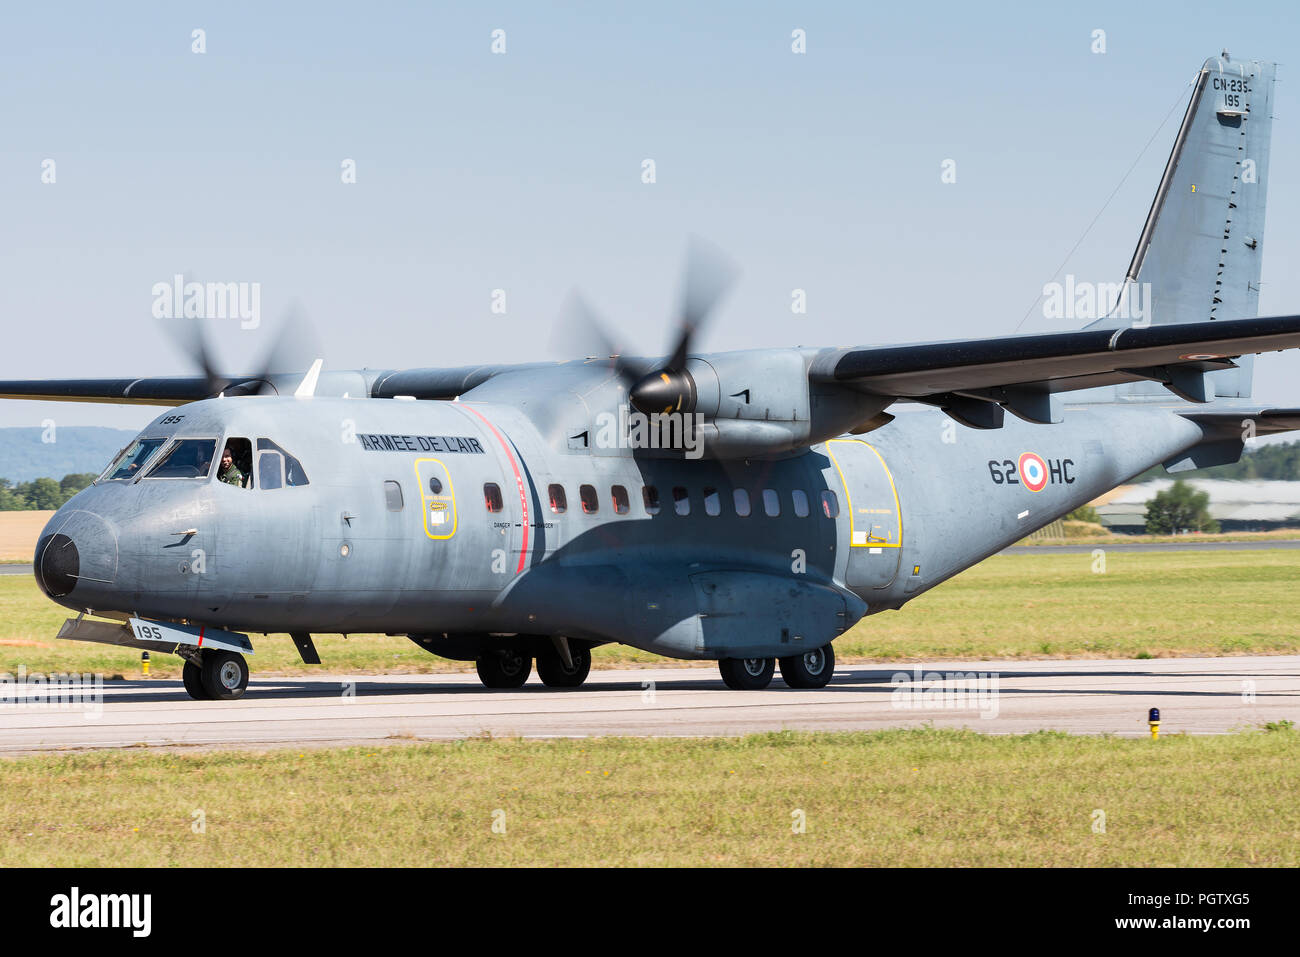 A CASA/IPTN CN-235 military transport aircraft of the French Air Force. Stock Photo